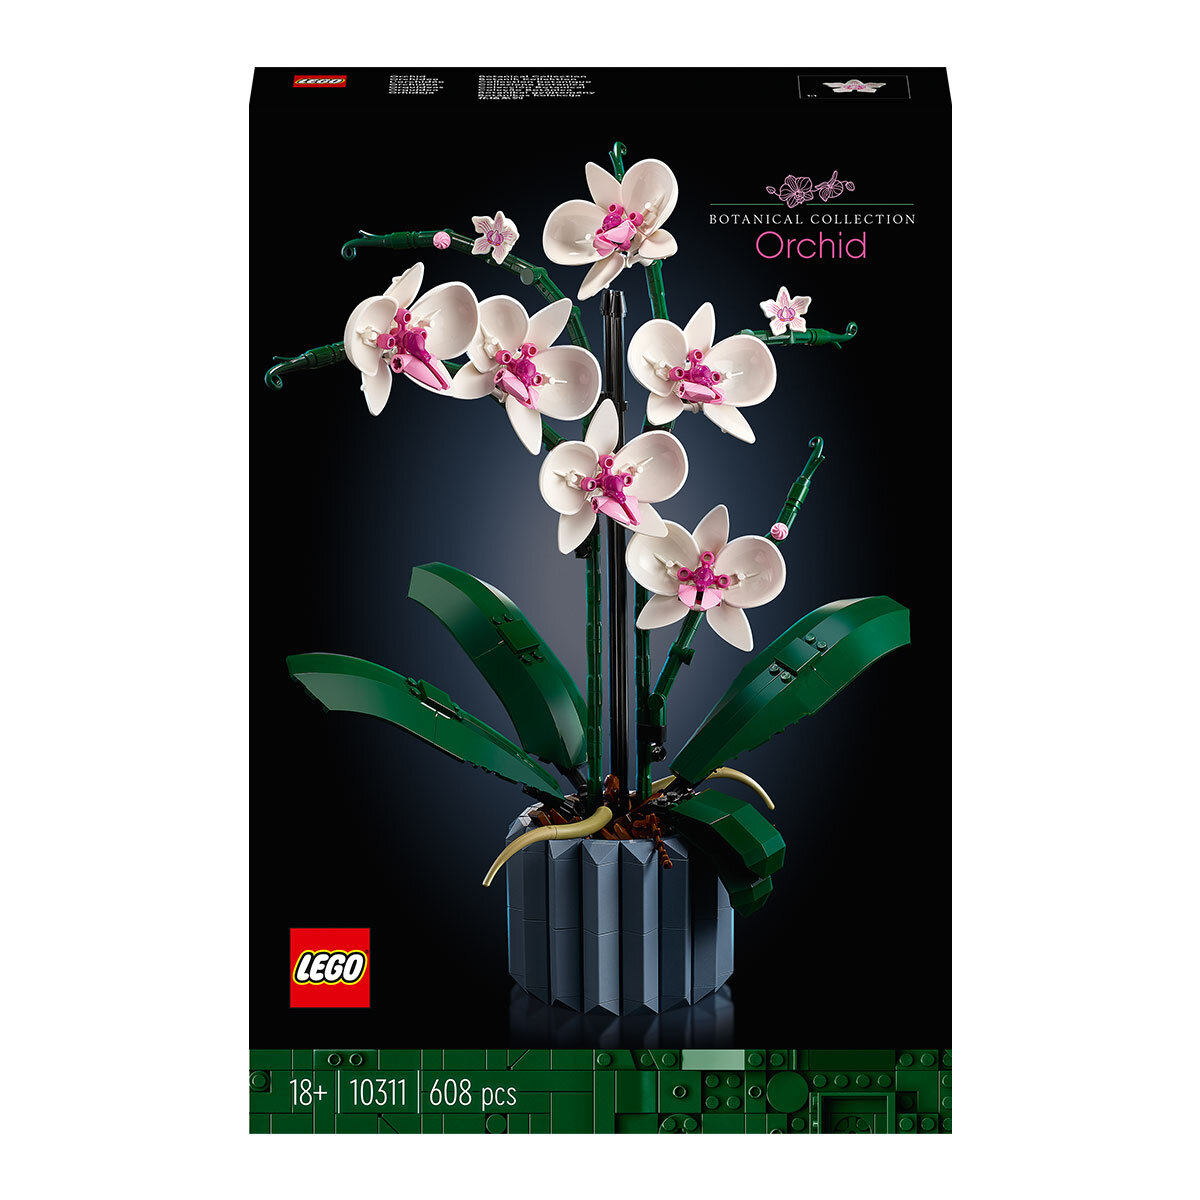 Buy LEGO Icons Orchid Box Image at Costco.co.uk